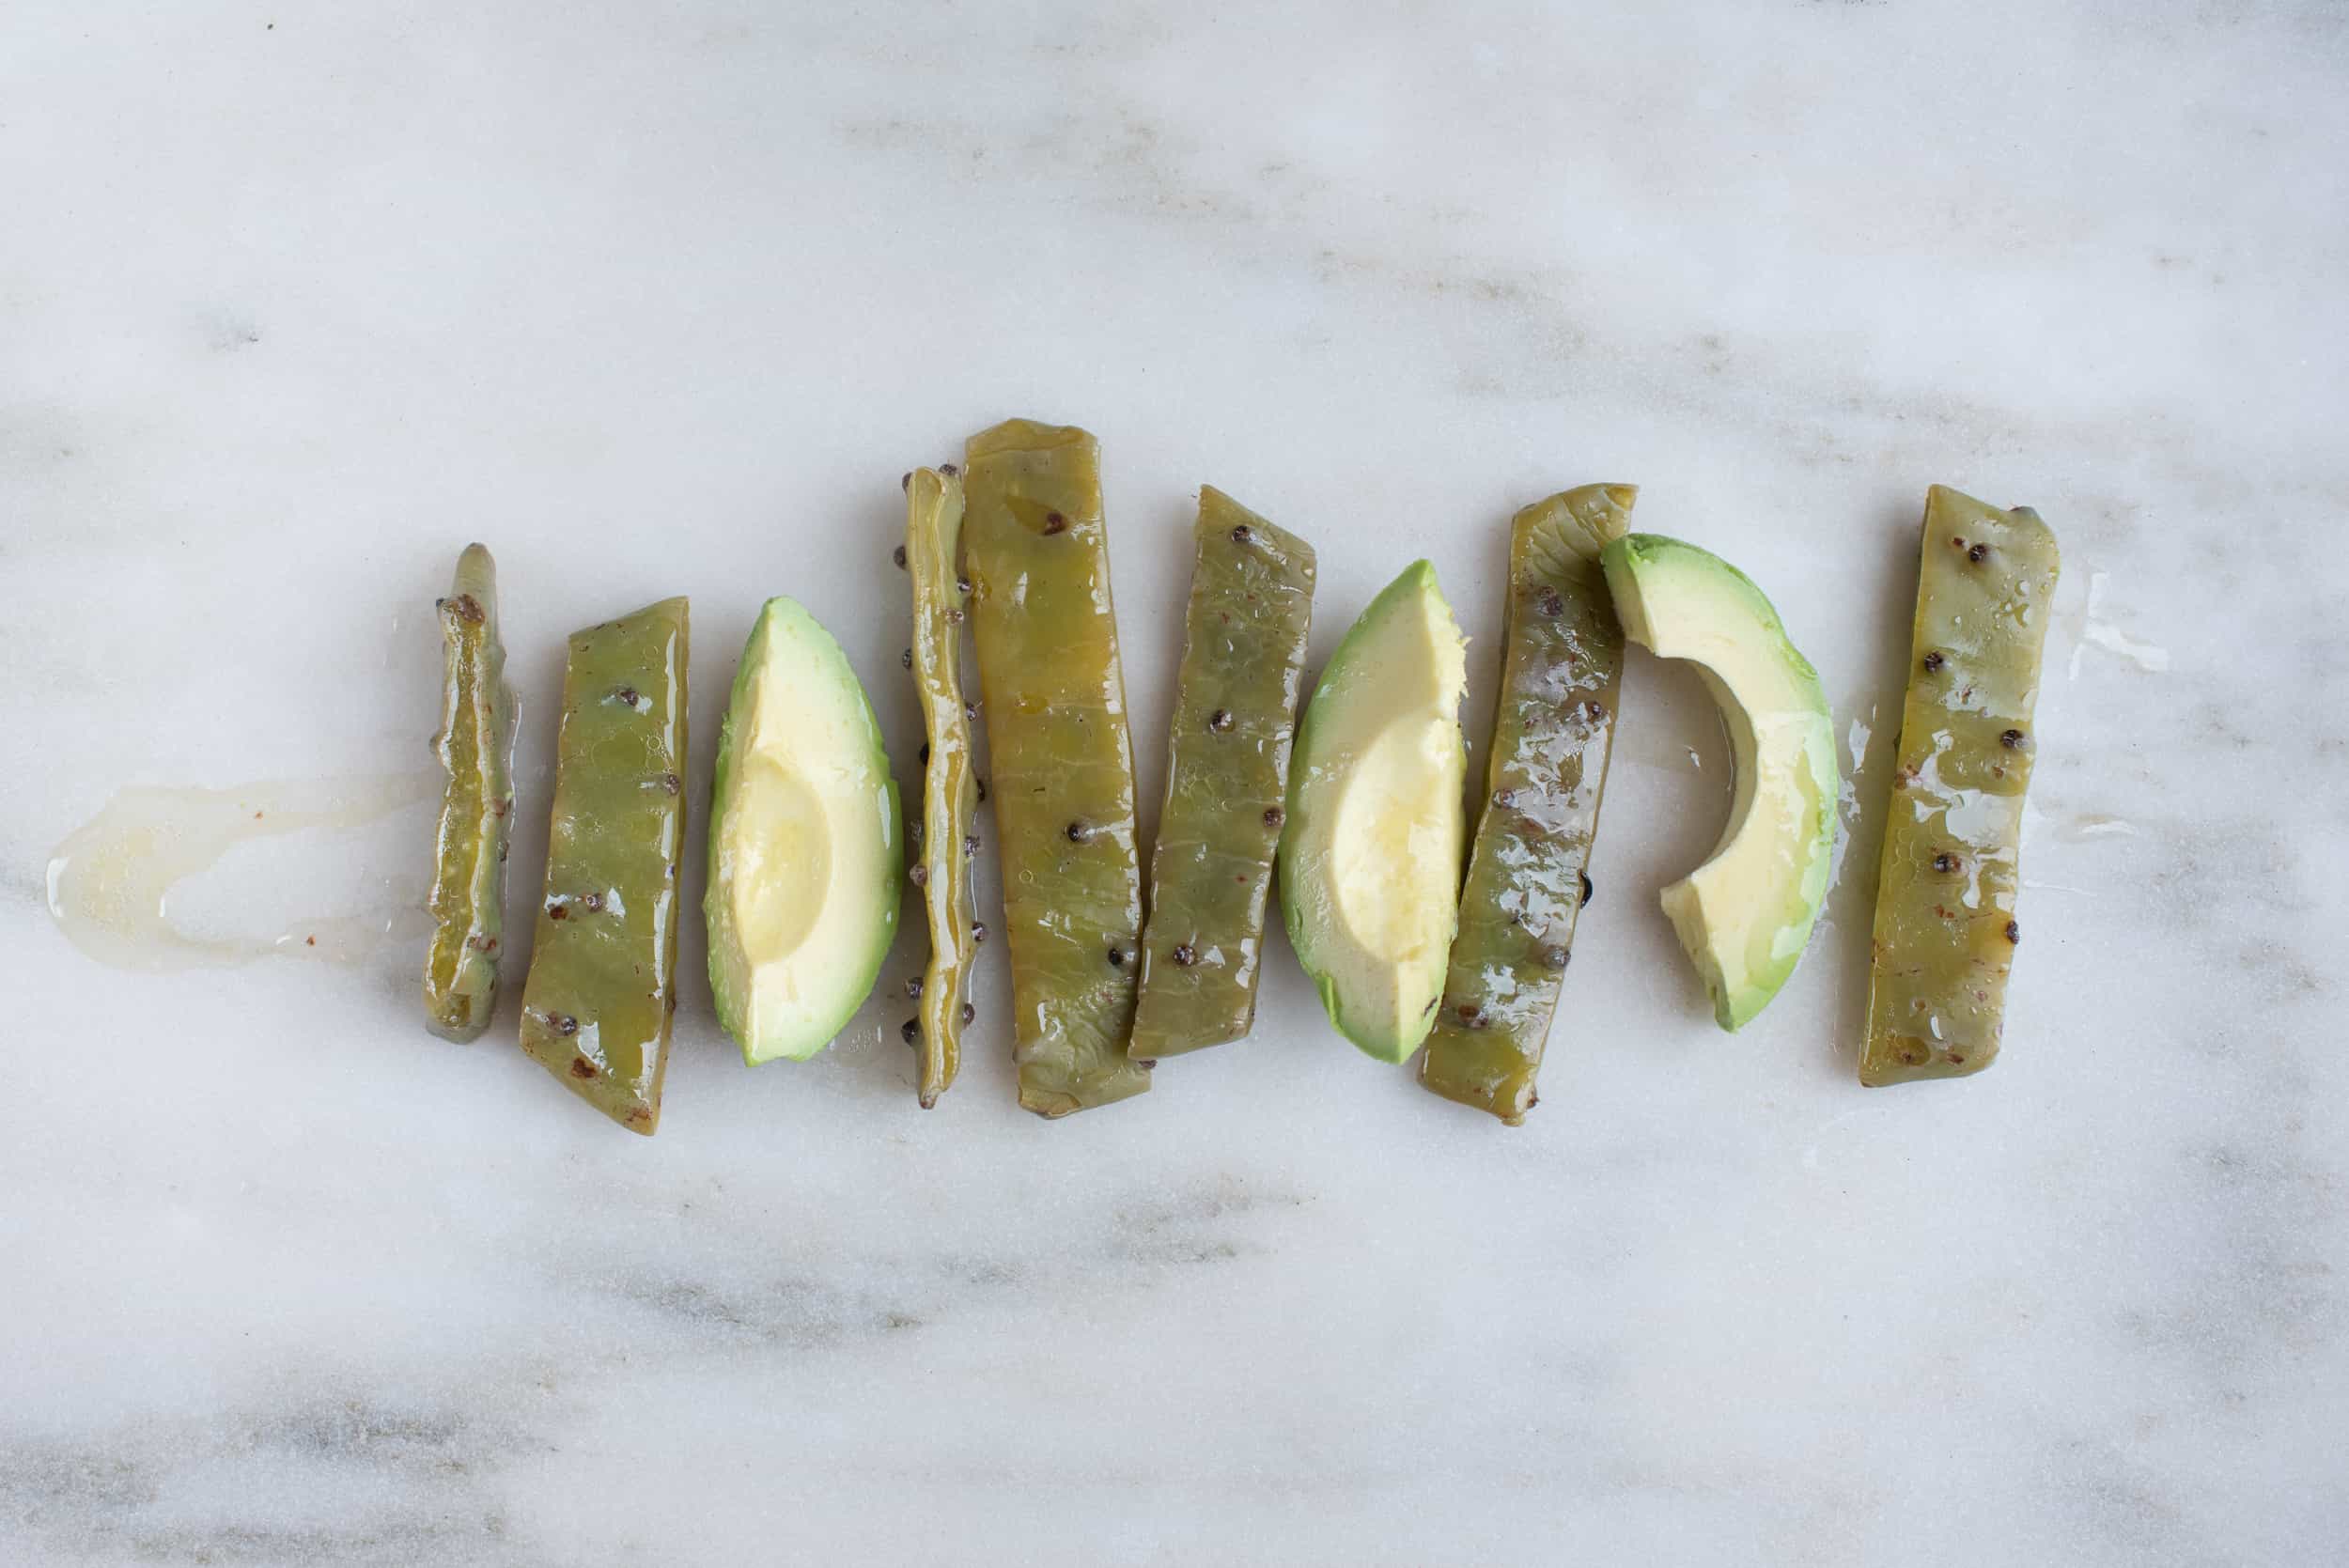 thin rectangular strips of cooked nopales and thin wedges of avocado on a white background drizzled with oil